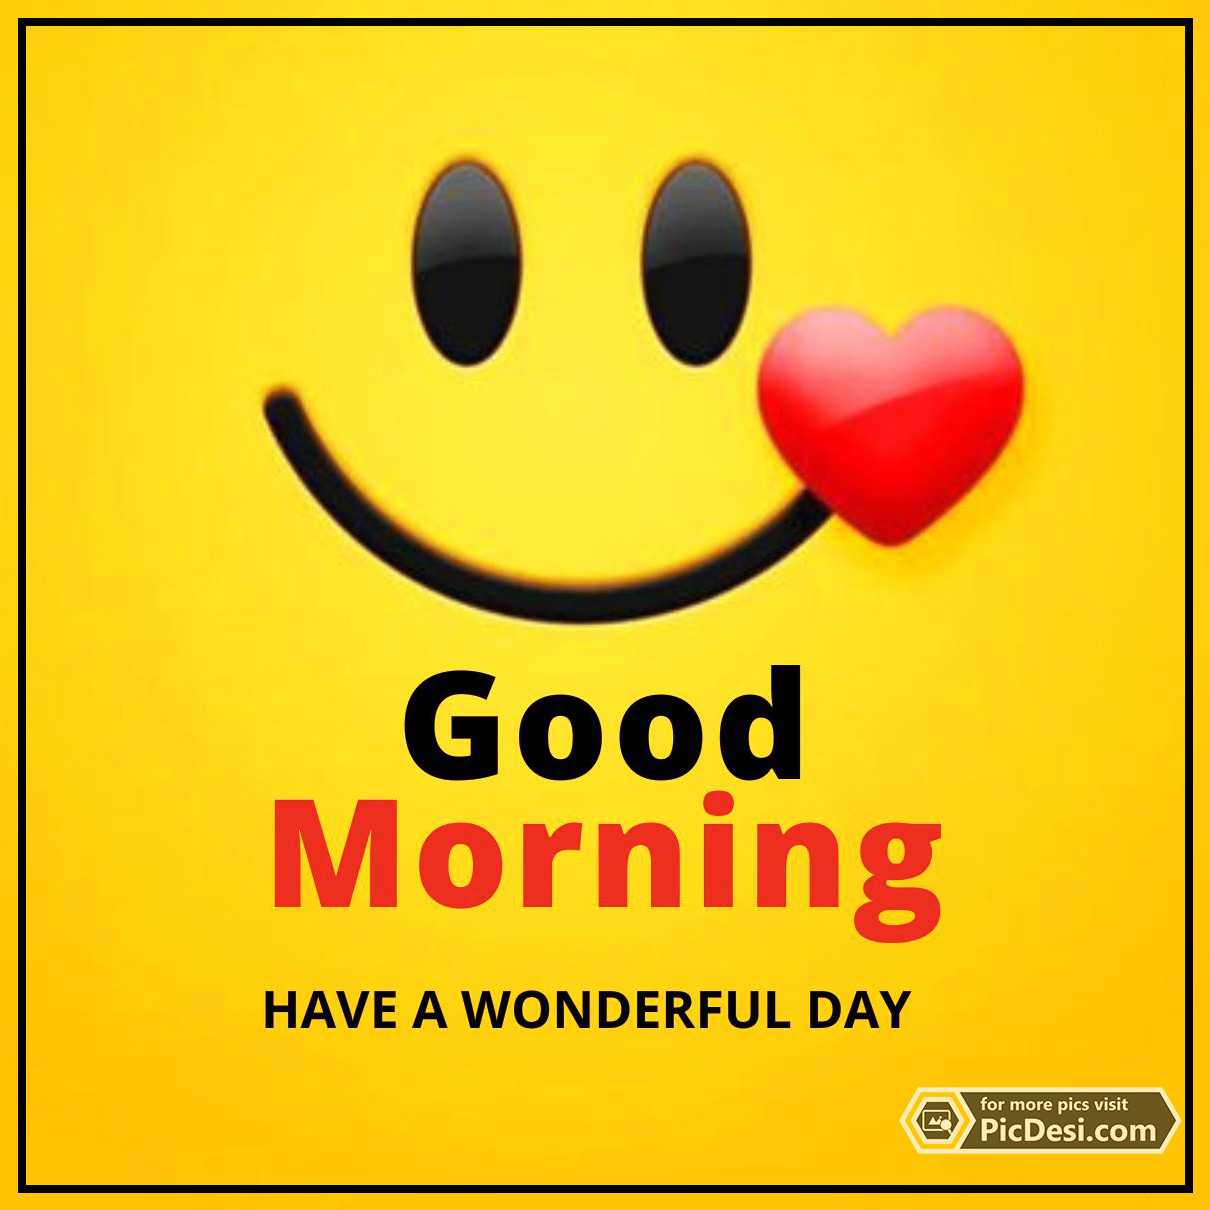 Have Wonderful Day Smiley Image